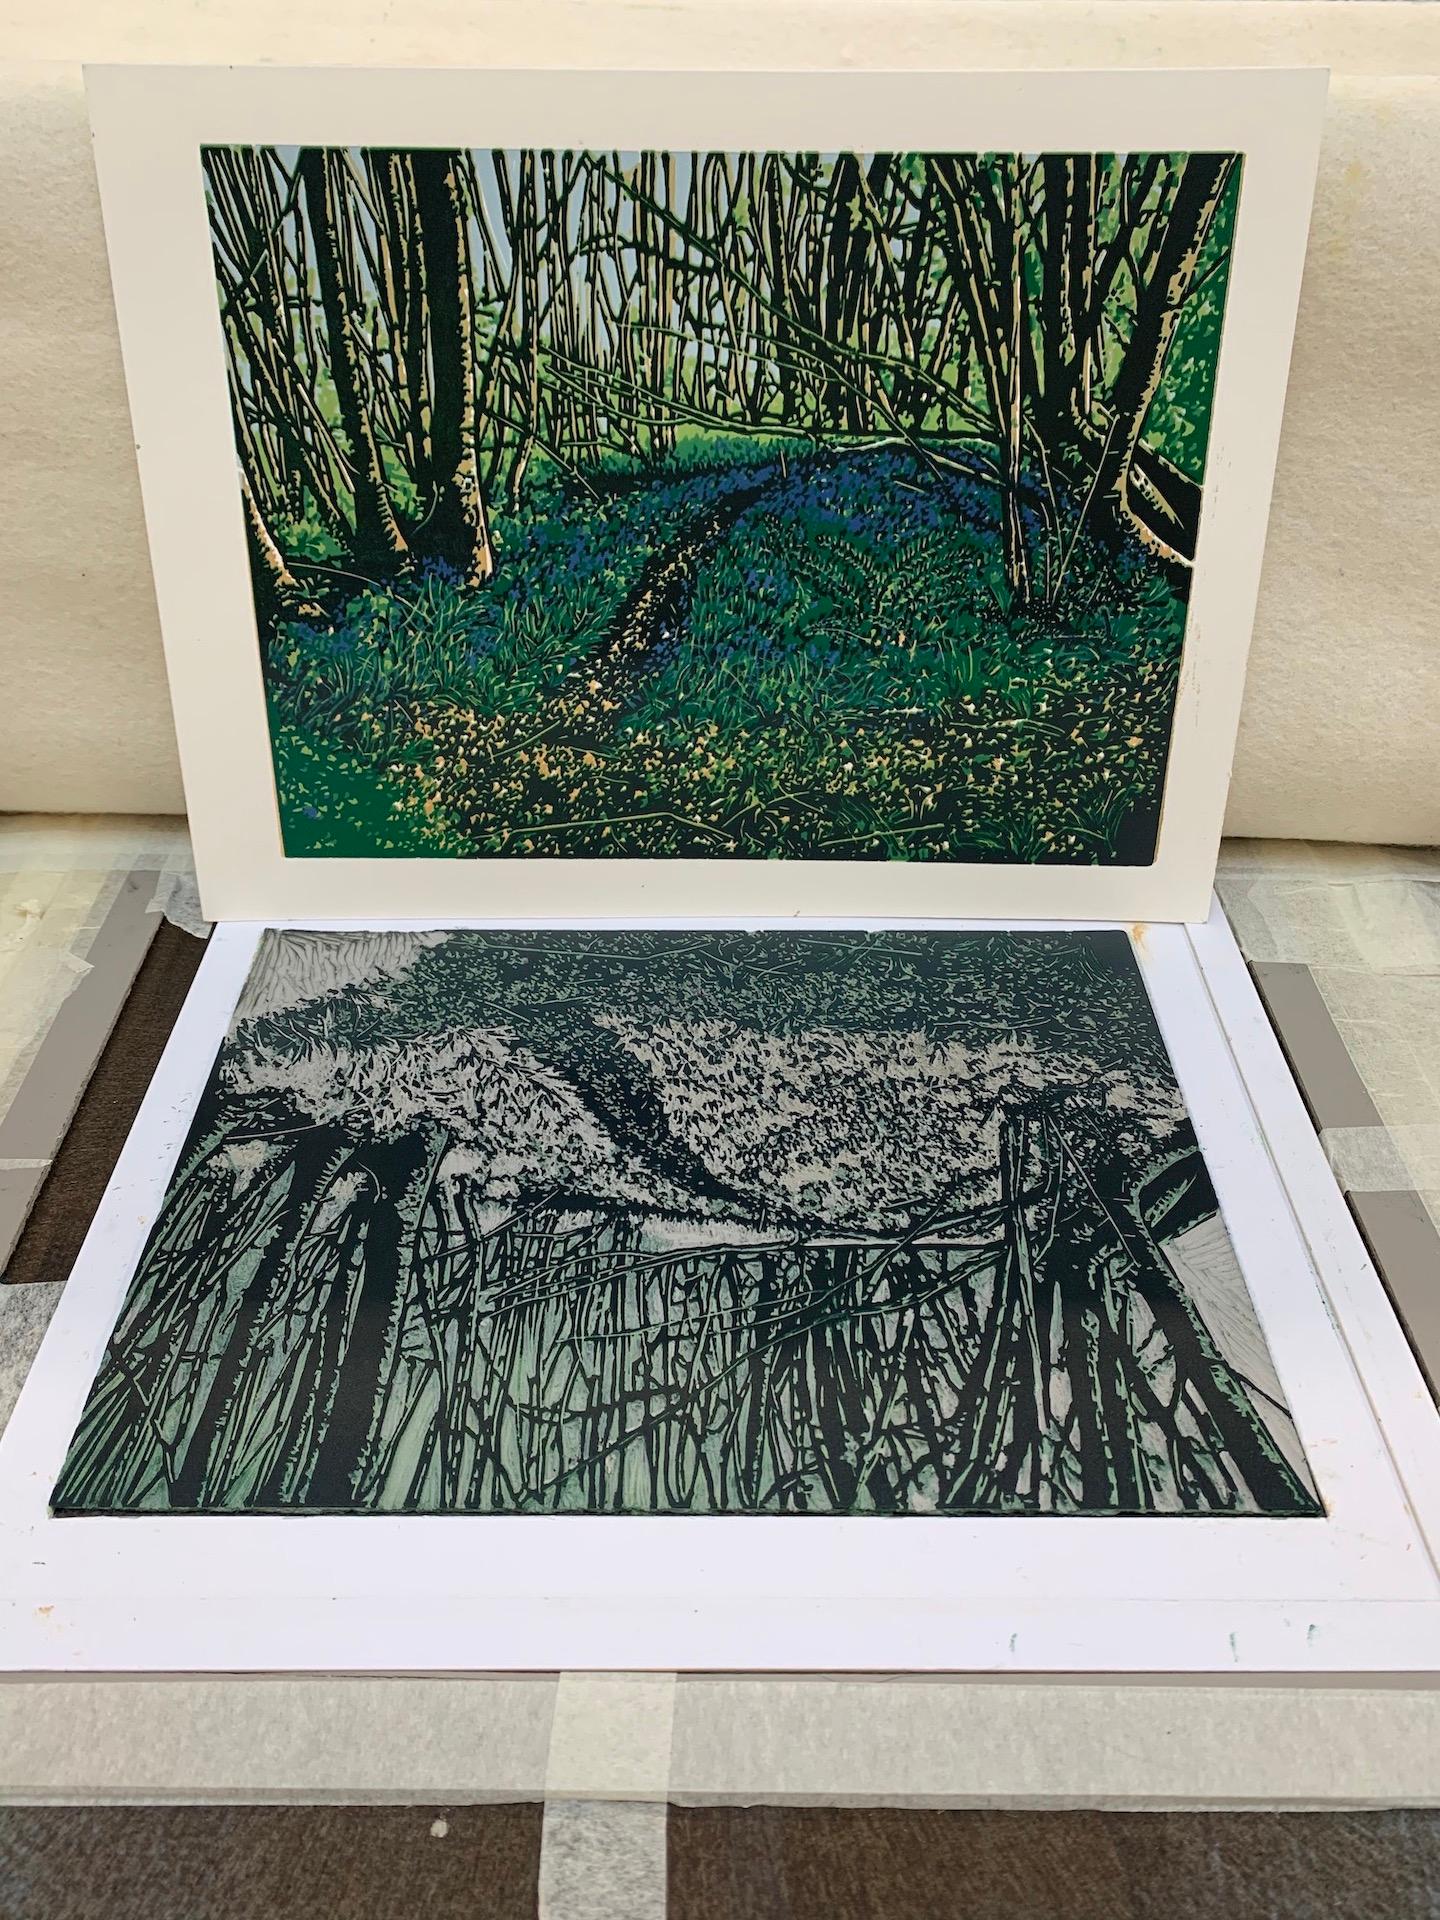 Jennifer Jokhoo
Emerald forest
Limited Edition Handmade reduction linocut print
Edition of 13
Sheet Size: H 26cm x W 34cm x D 0.1cm
Sold Unframed
Please note that in situ images are purely an indication of how a piece may look.

Emerald forest is an